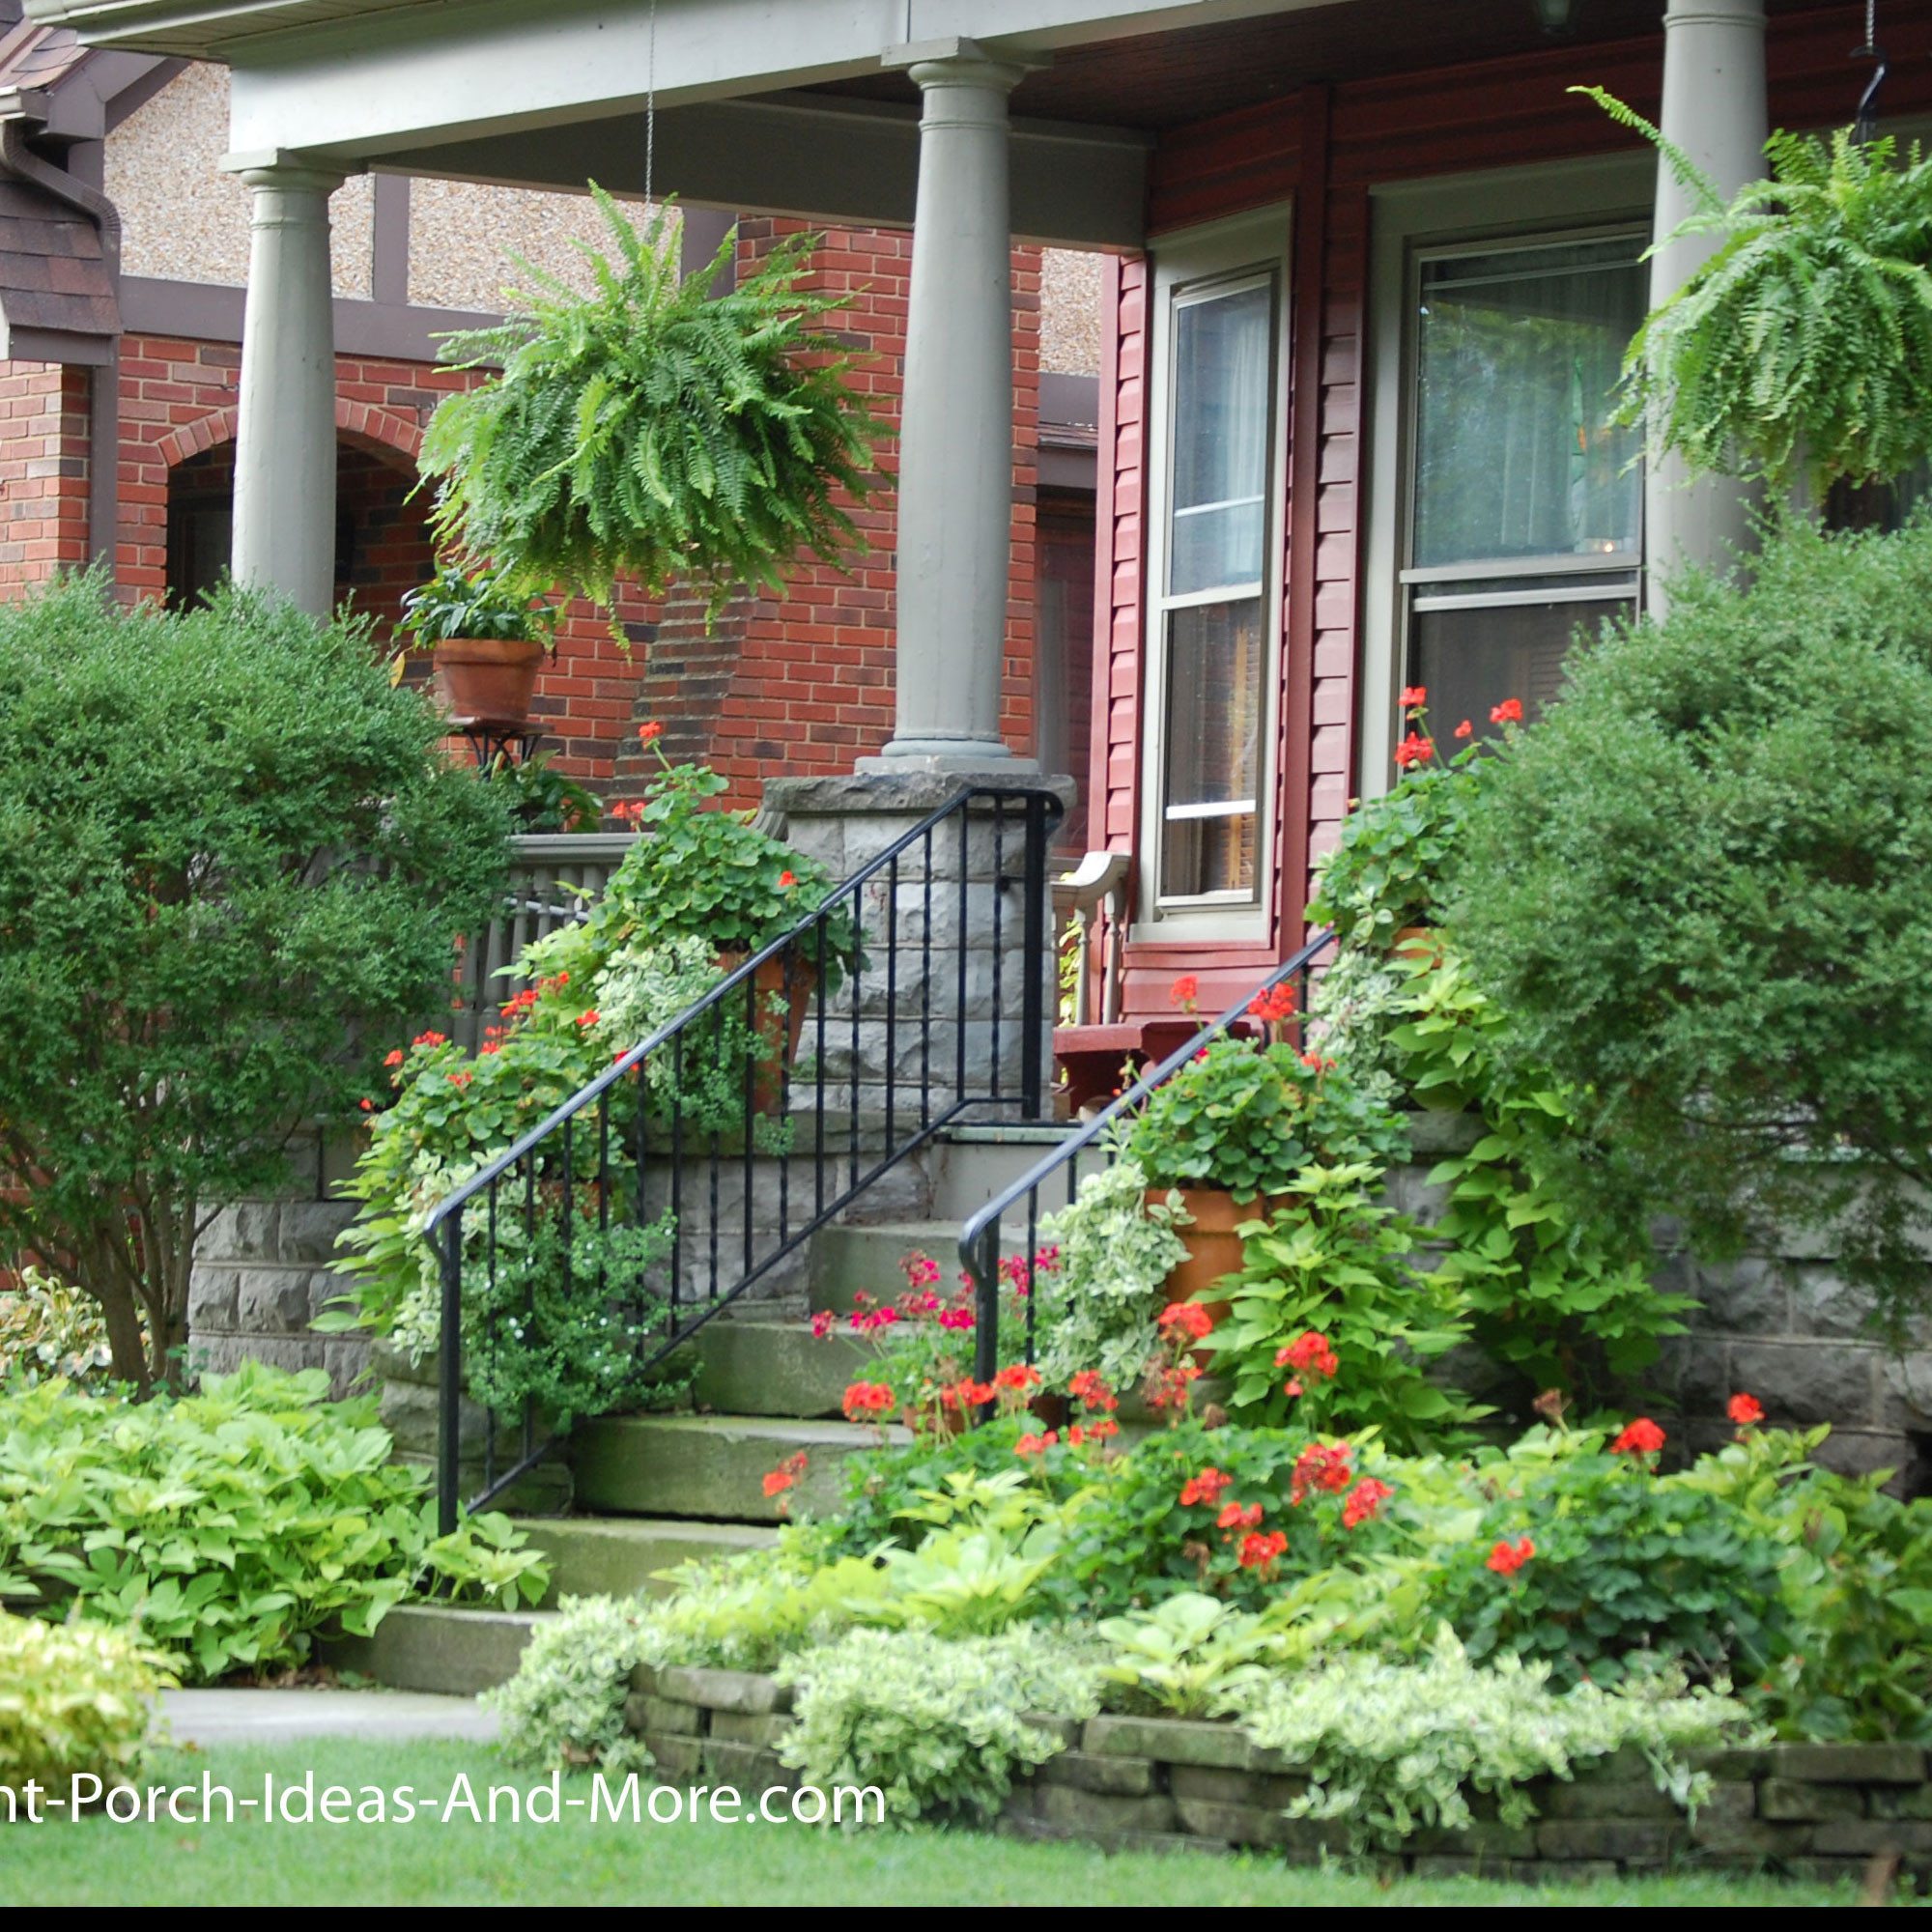 Front Porch Landscape Ideas
 Porch Landscaping Ideas for Your Front Yard and More